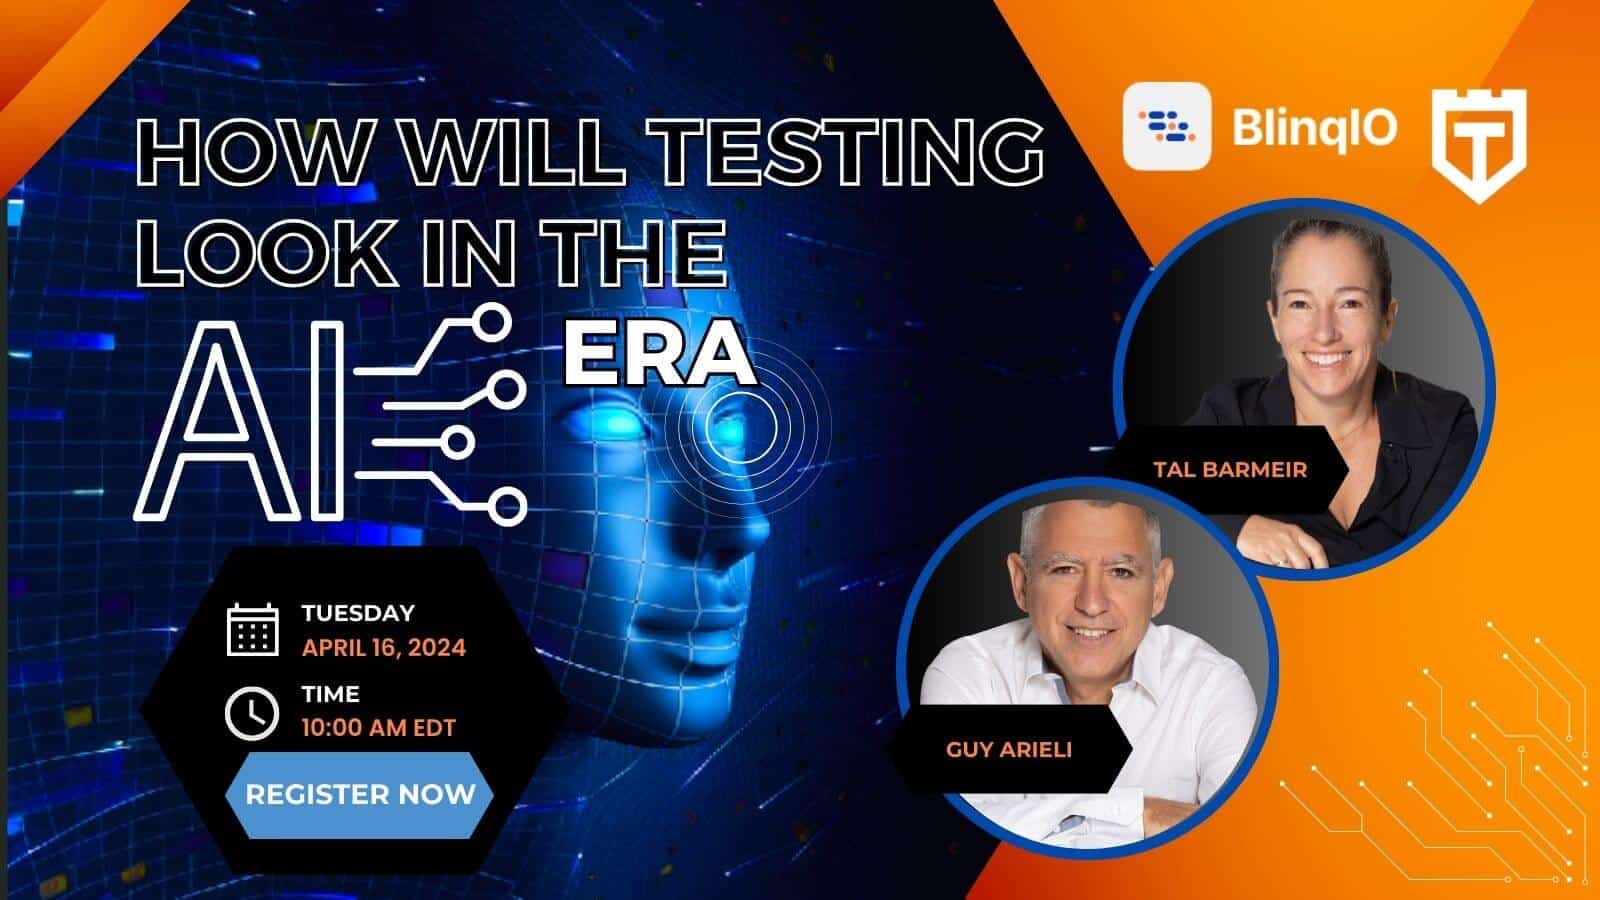 Webinar announcement for 'how will testing look in the ai era' featuring speakers tal barmeir and guy arieli, scheduled for tuesday, april 16, 2024, at 10:00 am edt.